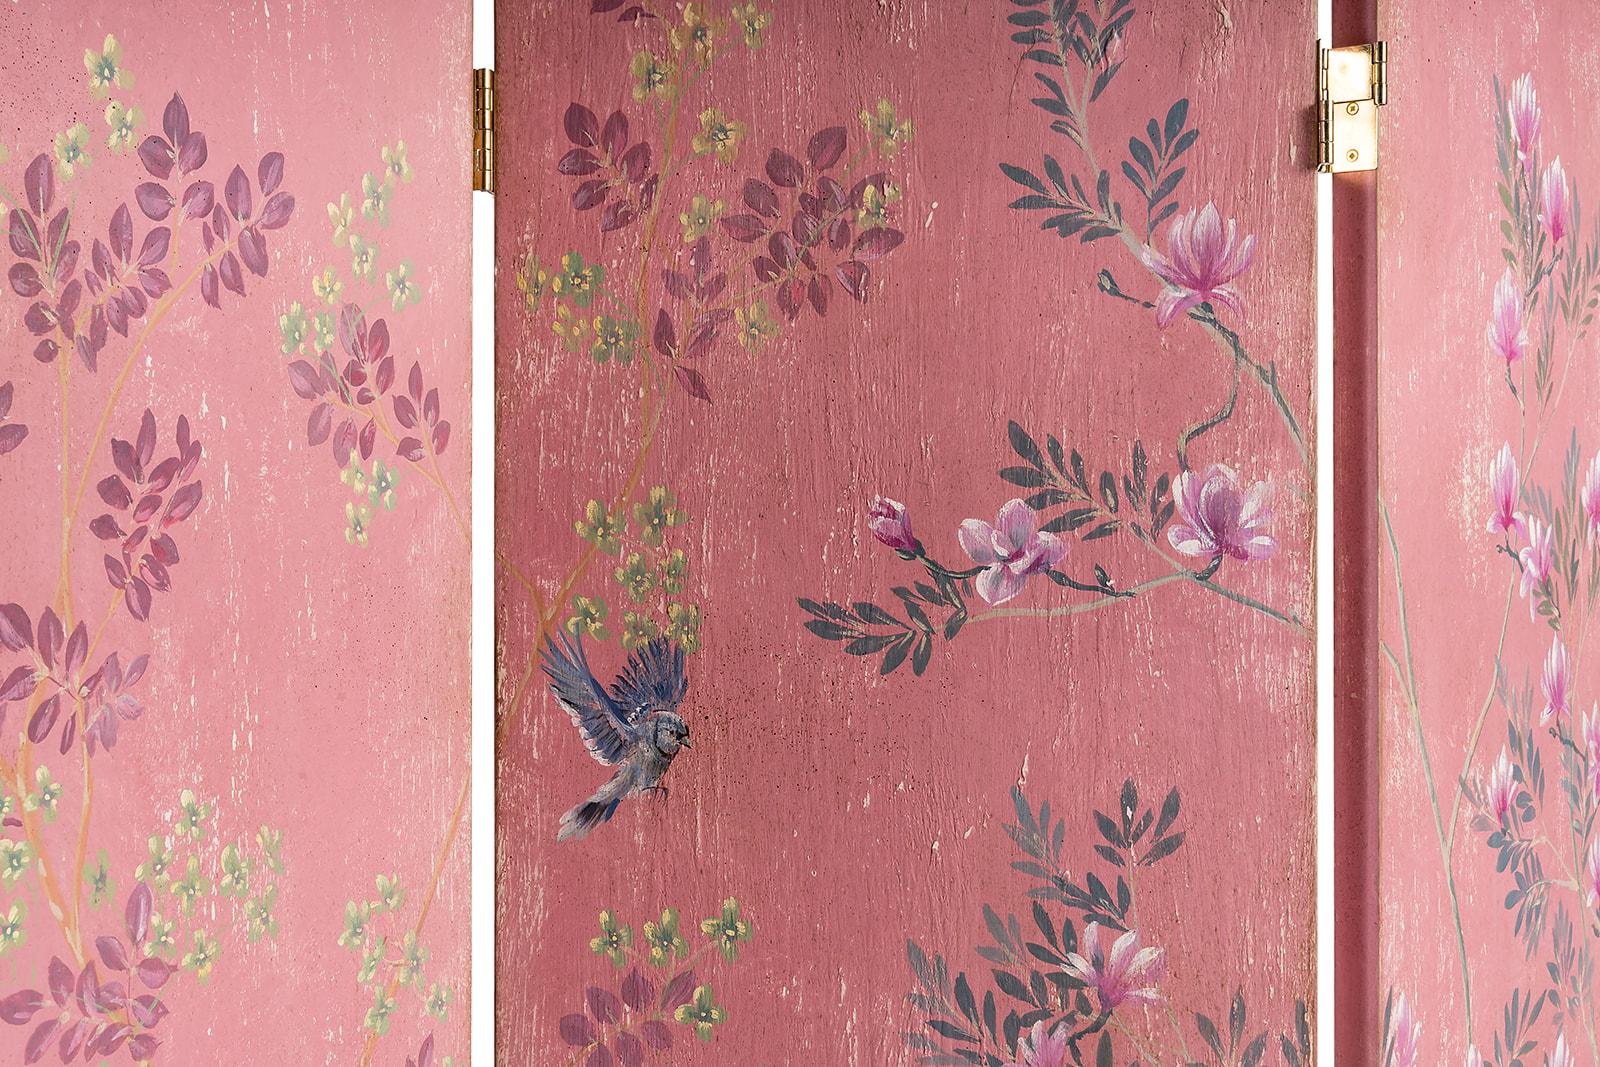 From our Hand-Painted Furniture Collection, we are pleased to introduce you to our Fuchsia Otello Screen. 
Nature has always been a source of inspiration for our hand-decorated furnishings. We aspire to capture its grace and lightness, with our